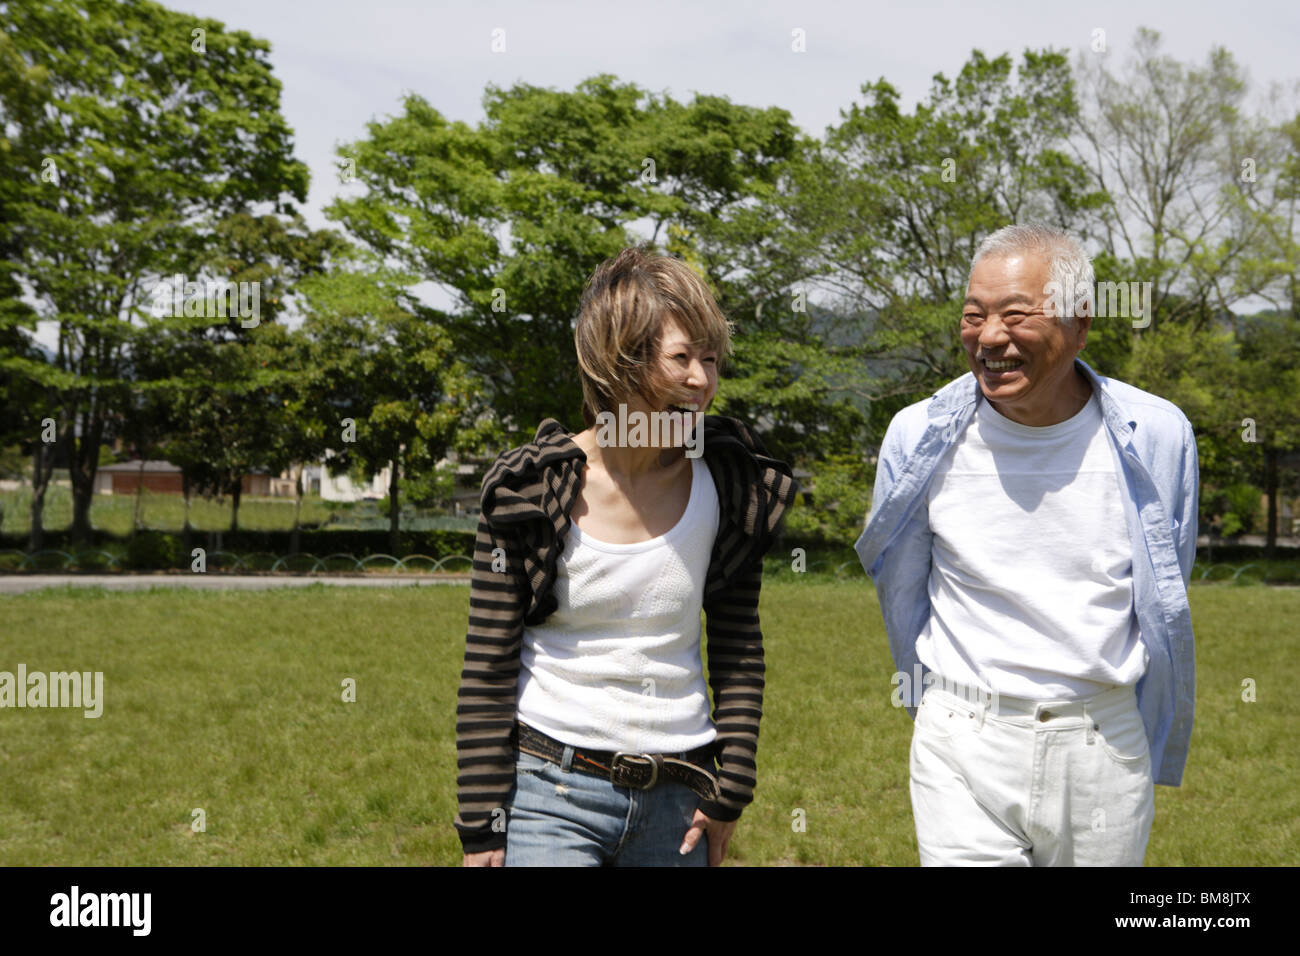 Man woman walking in park, smiling Banque D'Images